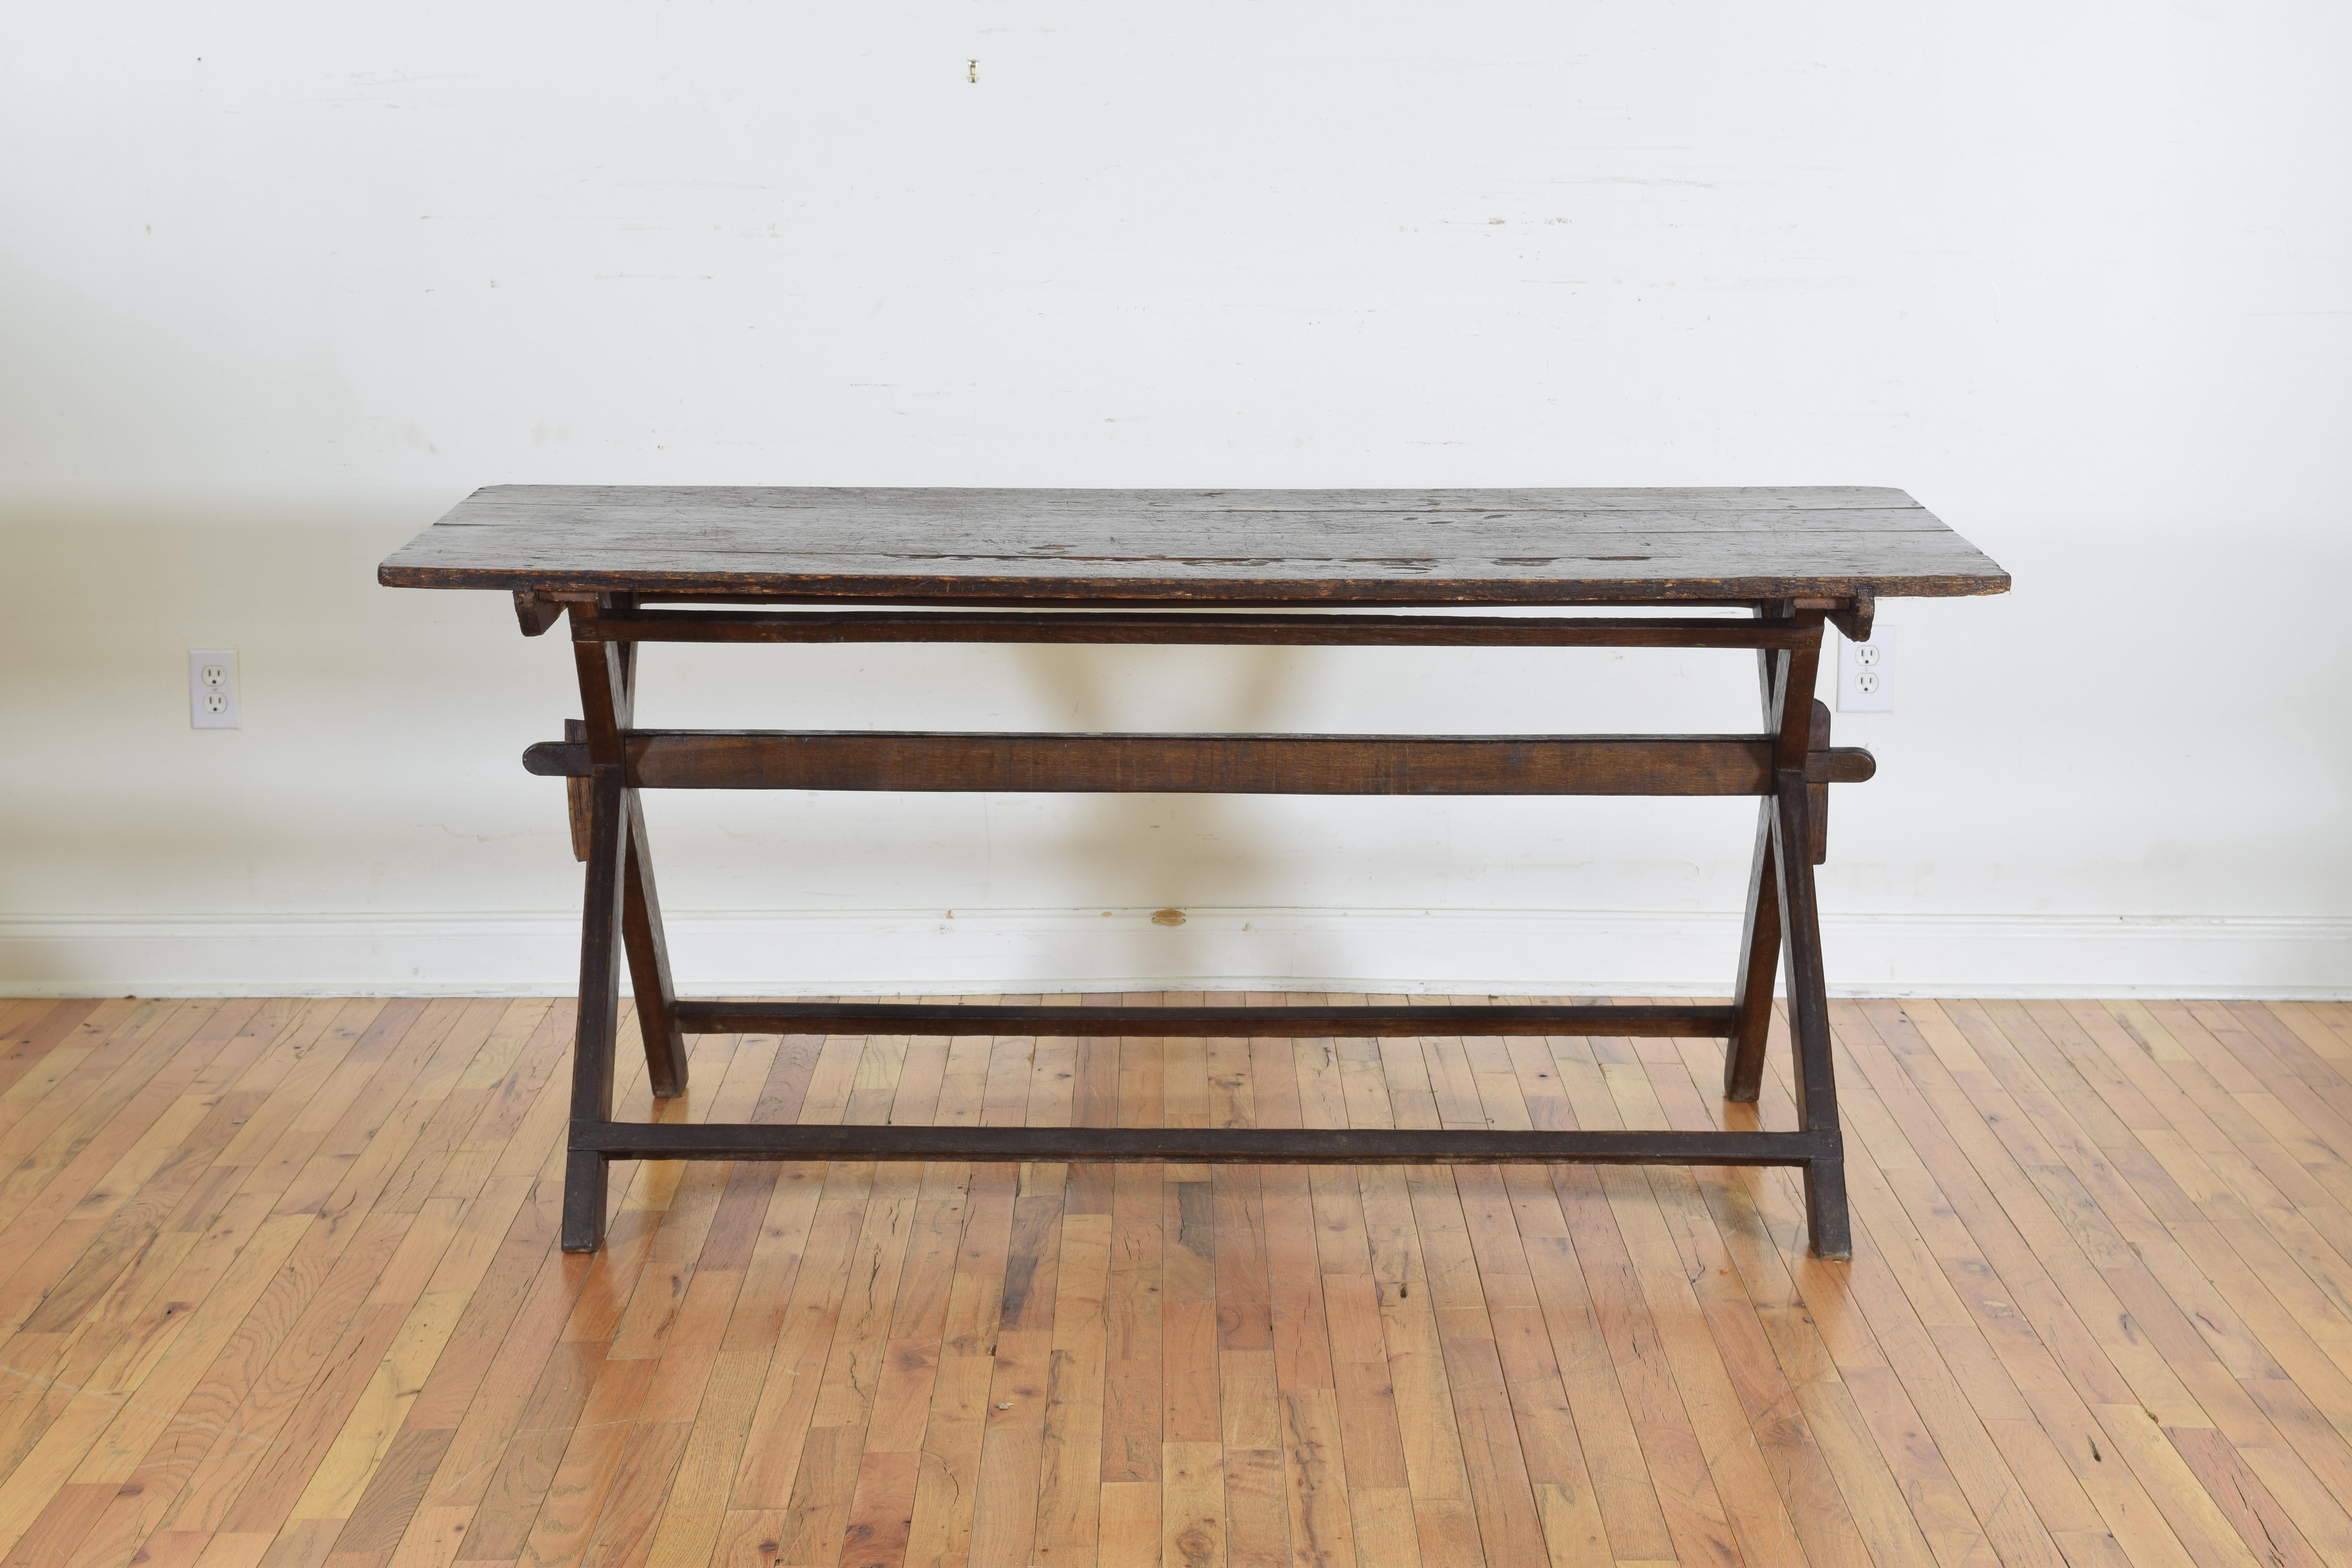 Carved N. Italian or Austrian Pinewood Trestle-Form Campaign-Style Table, circa 1870